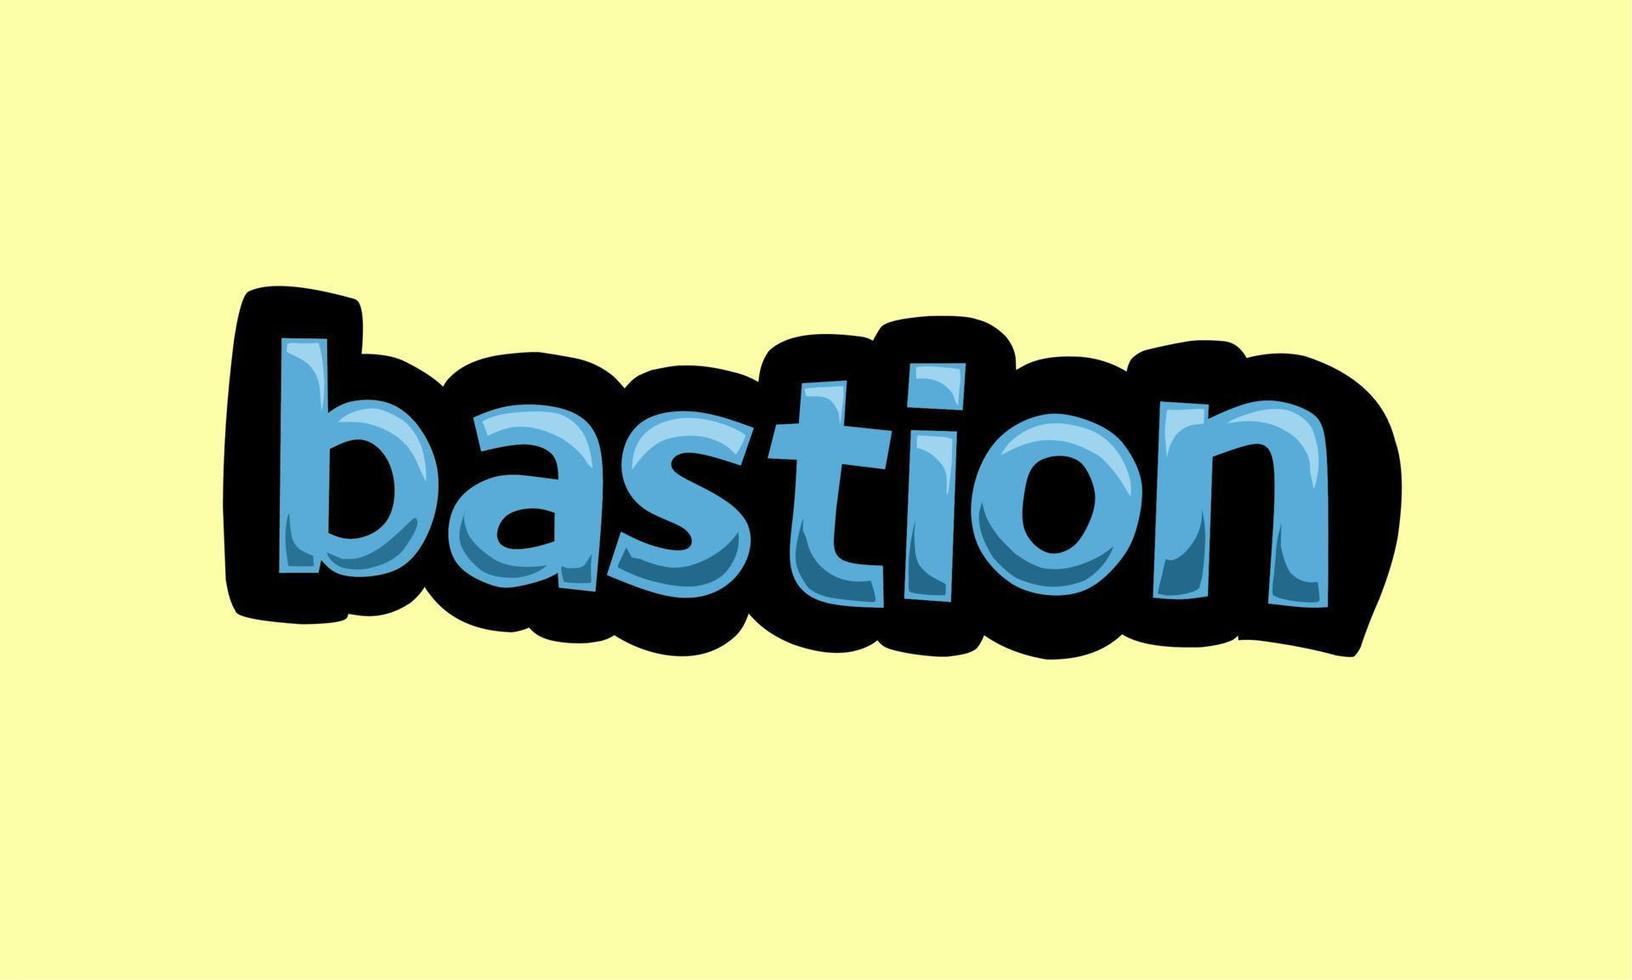 bastion writing vector design on a yellow background